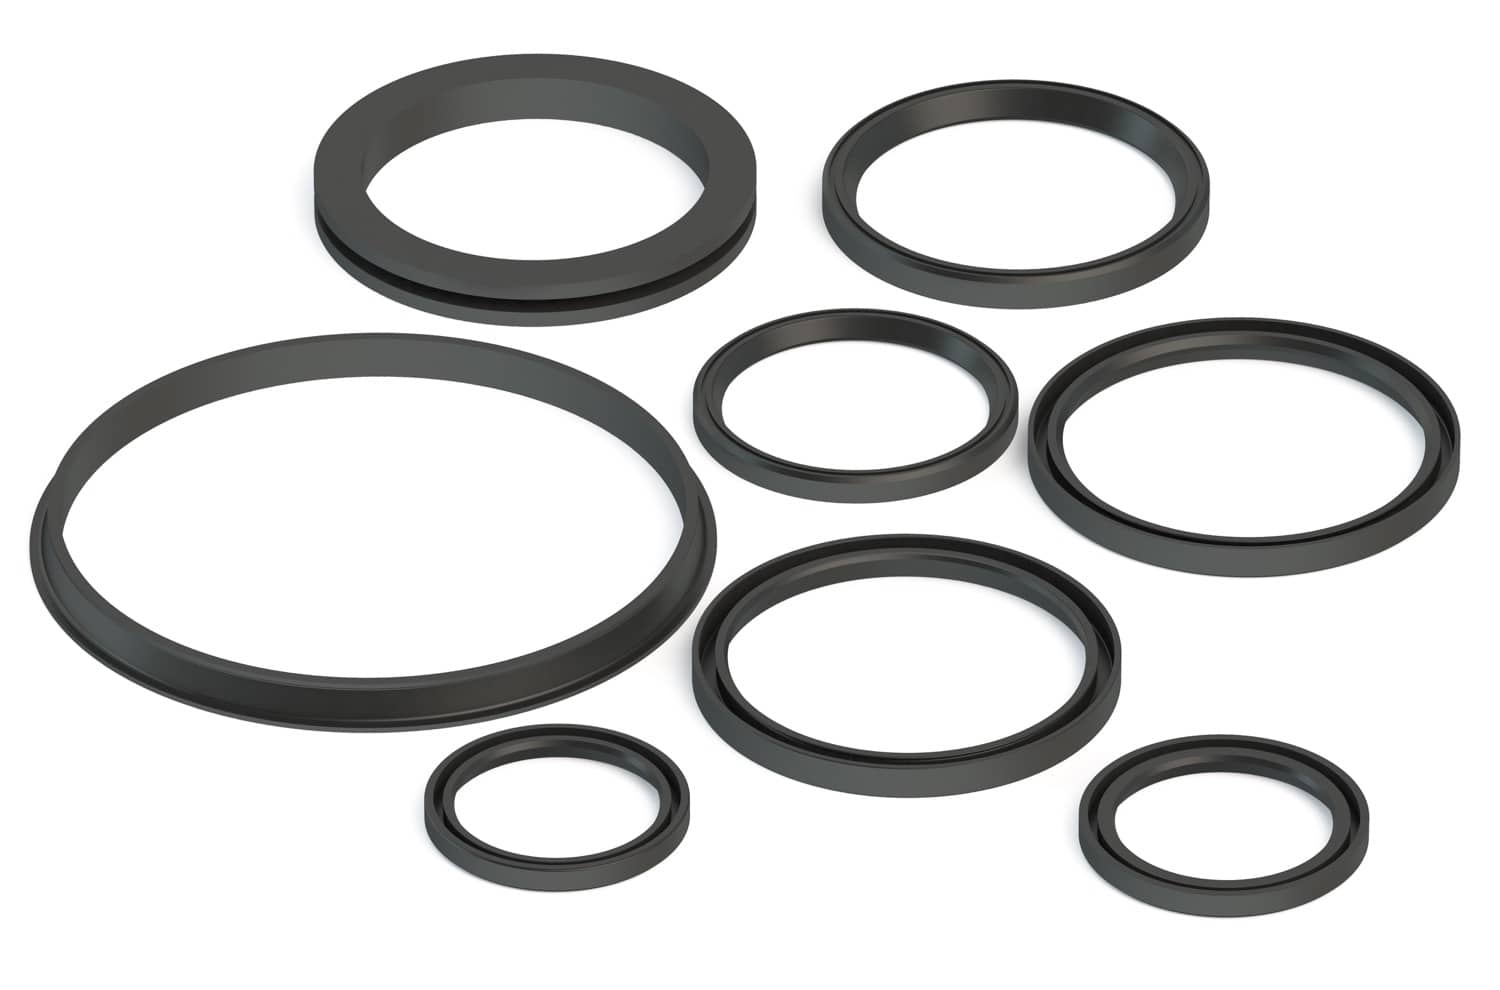 Lip seals for industrial use